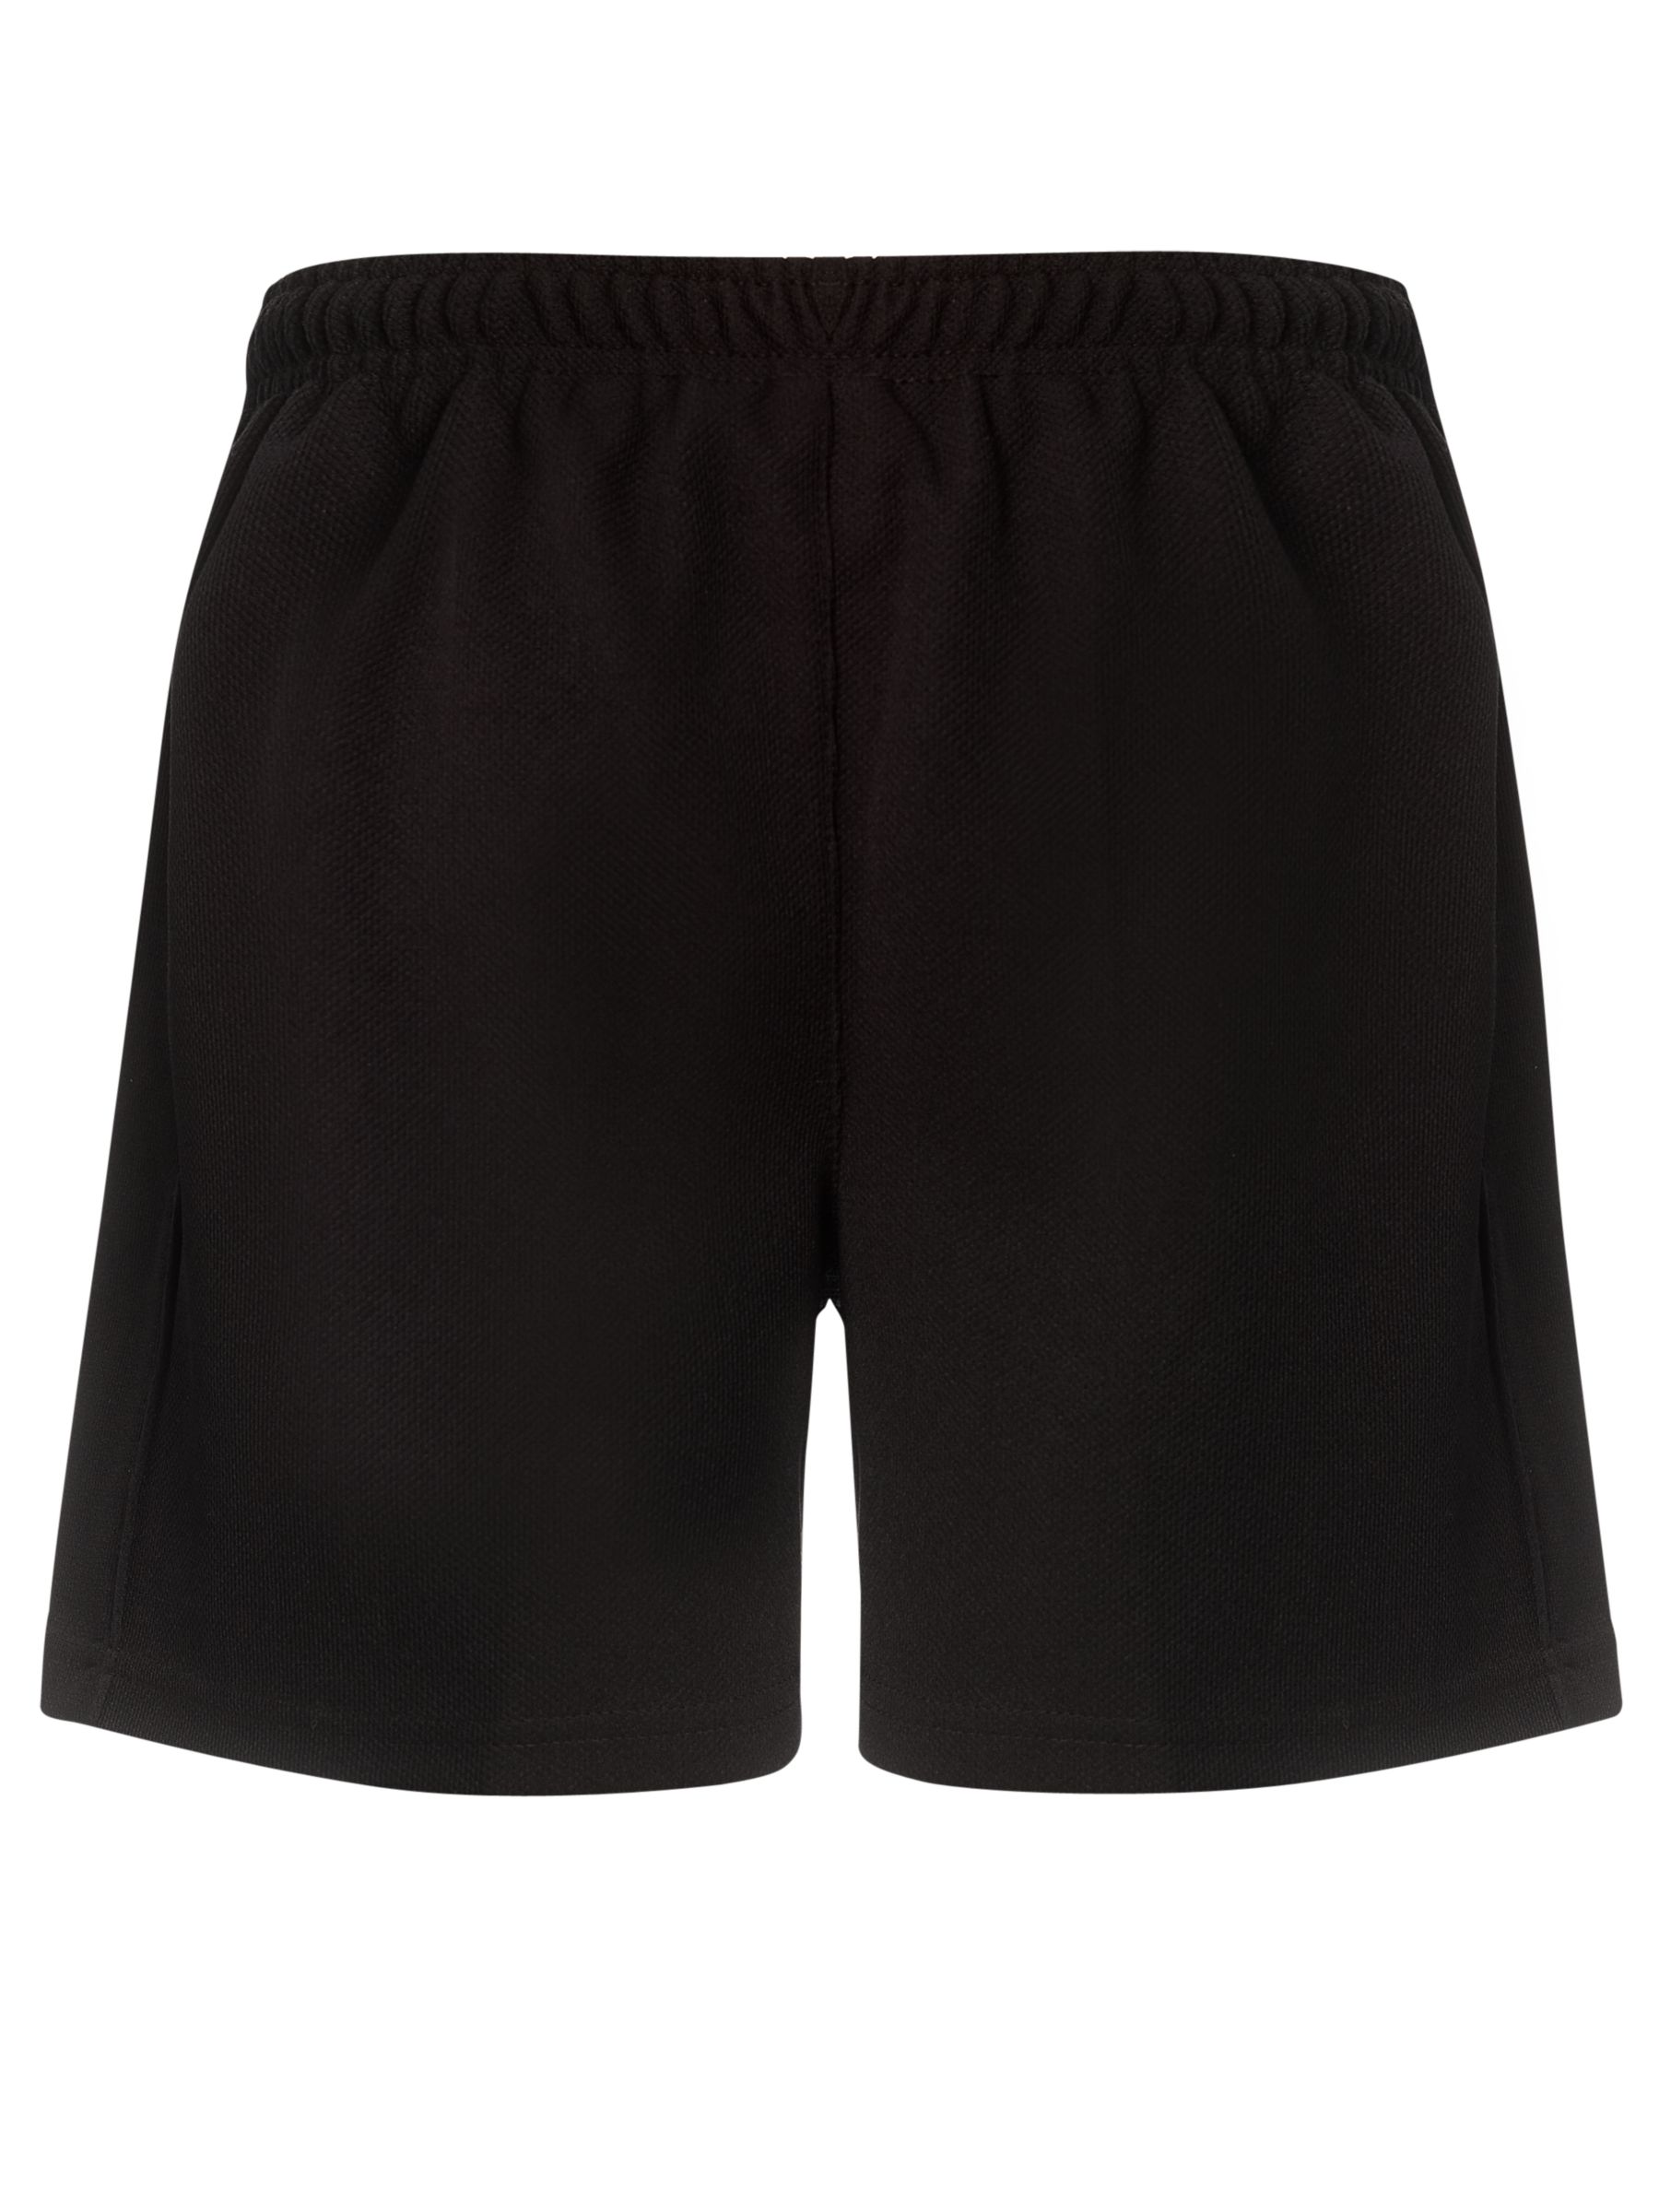 St Joseph's College Boys' Rugby Shorts at John Lewis & Partners